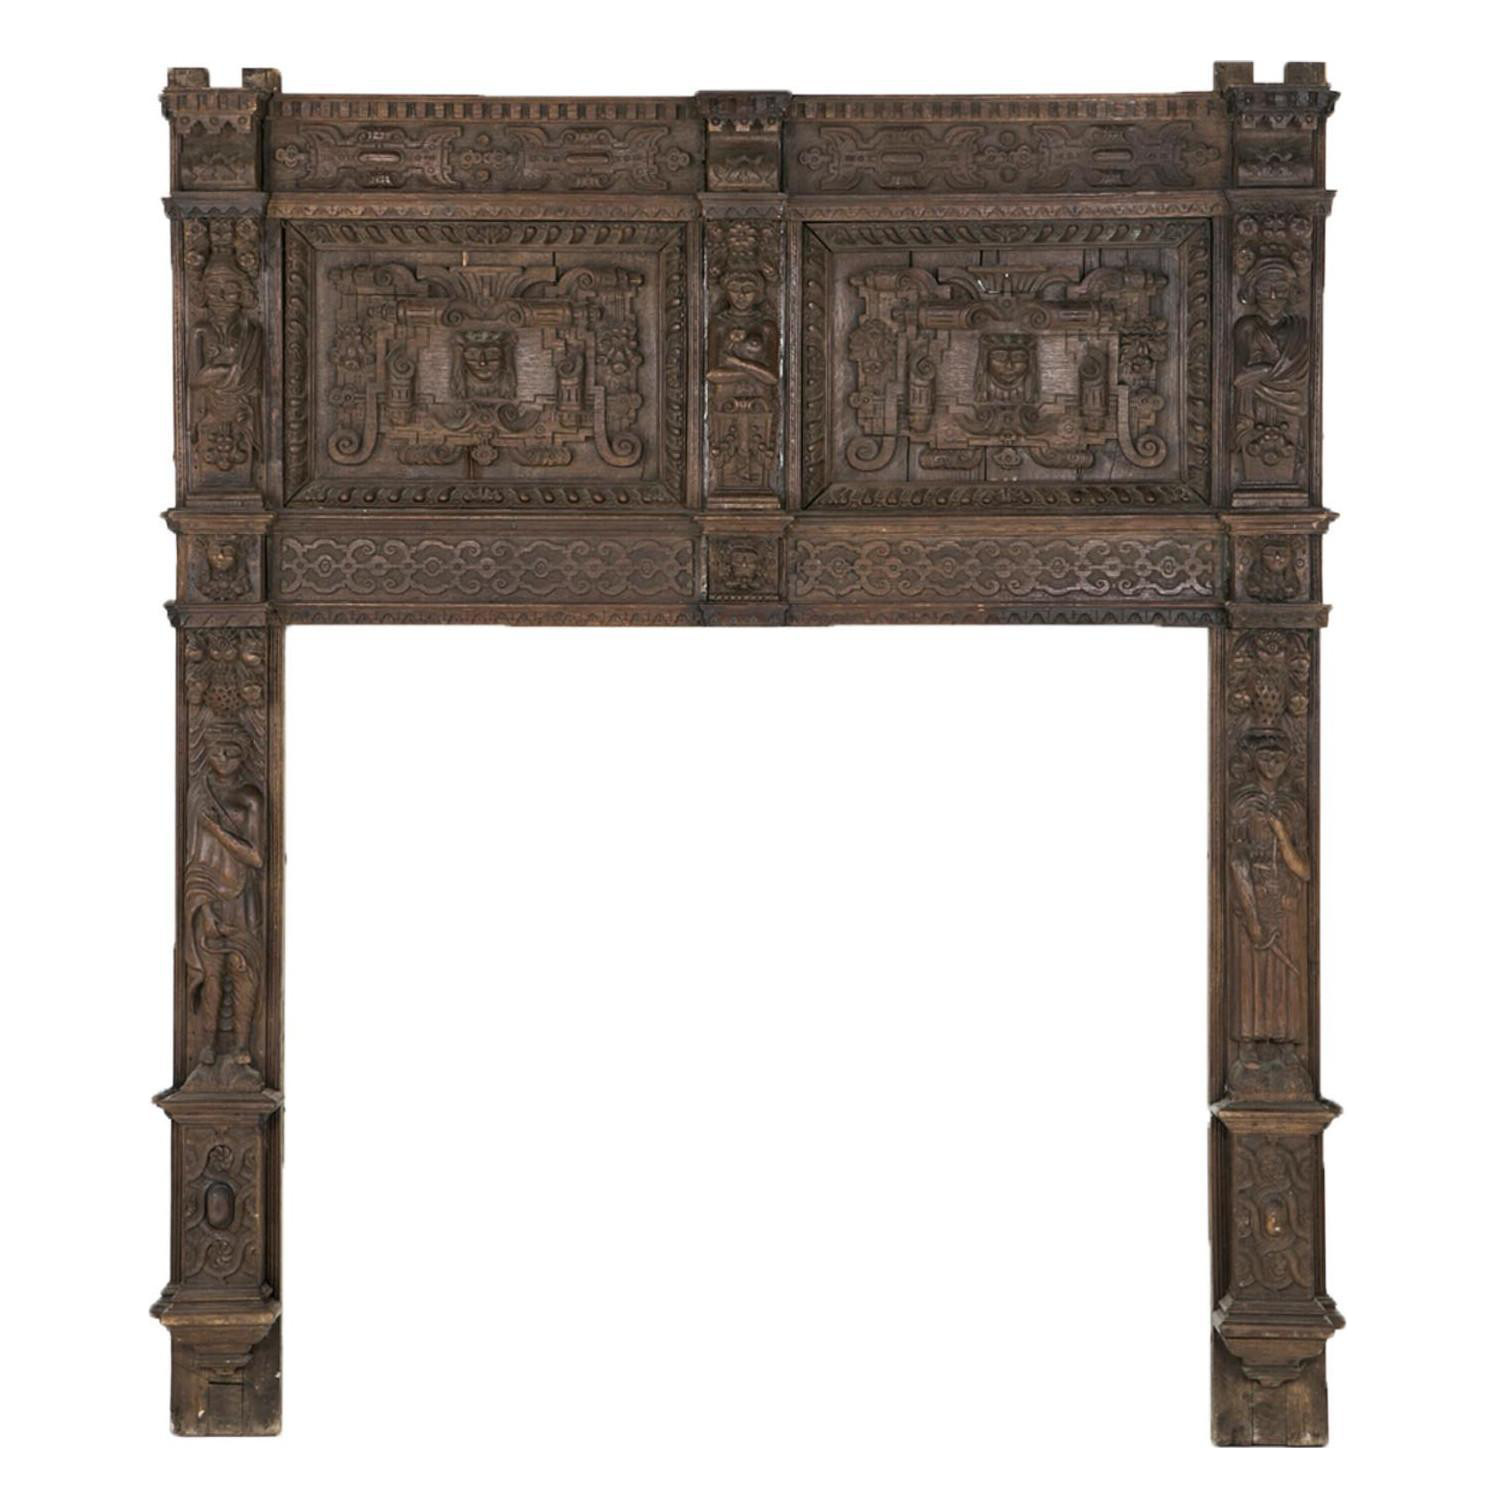 Gothic Bedroom Furniture for Sale Lovely Circa 1580 Oak Gothic Fire Surround